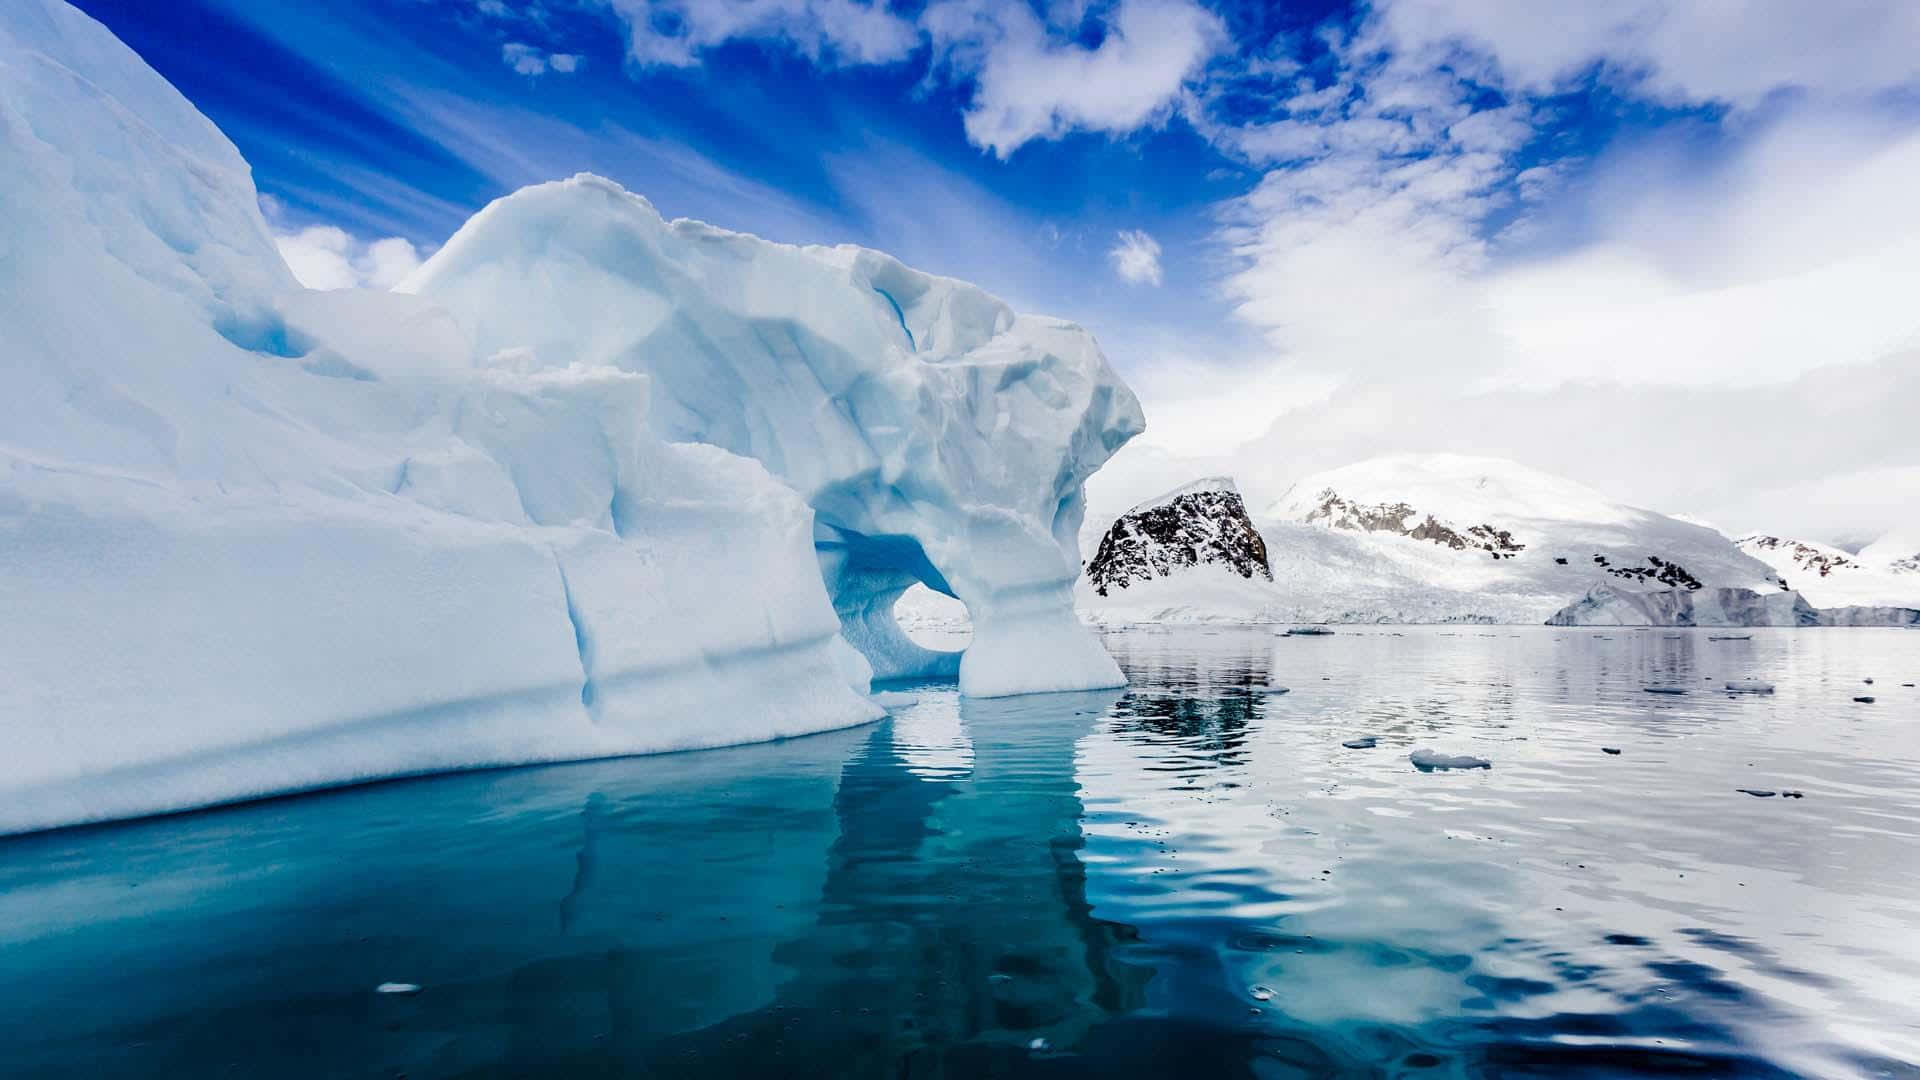 A Large Iceberg Is Floating In The Water